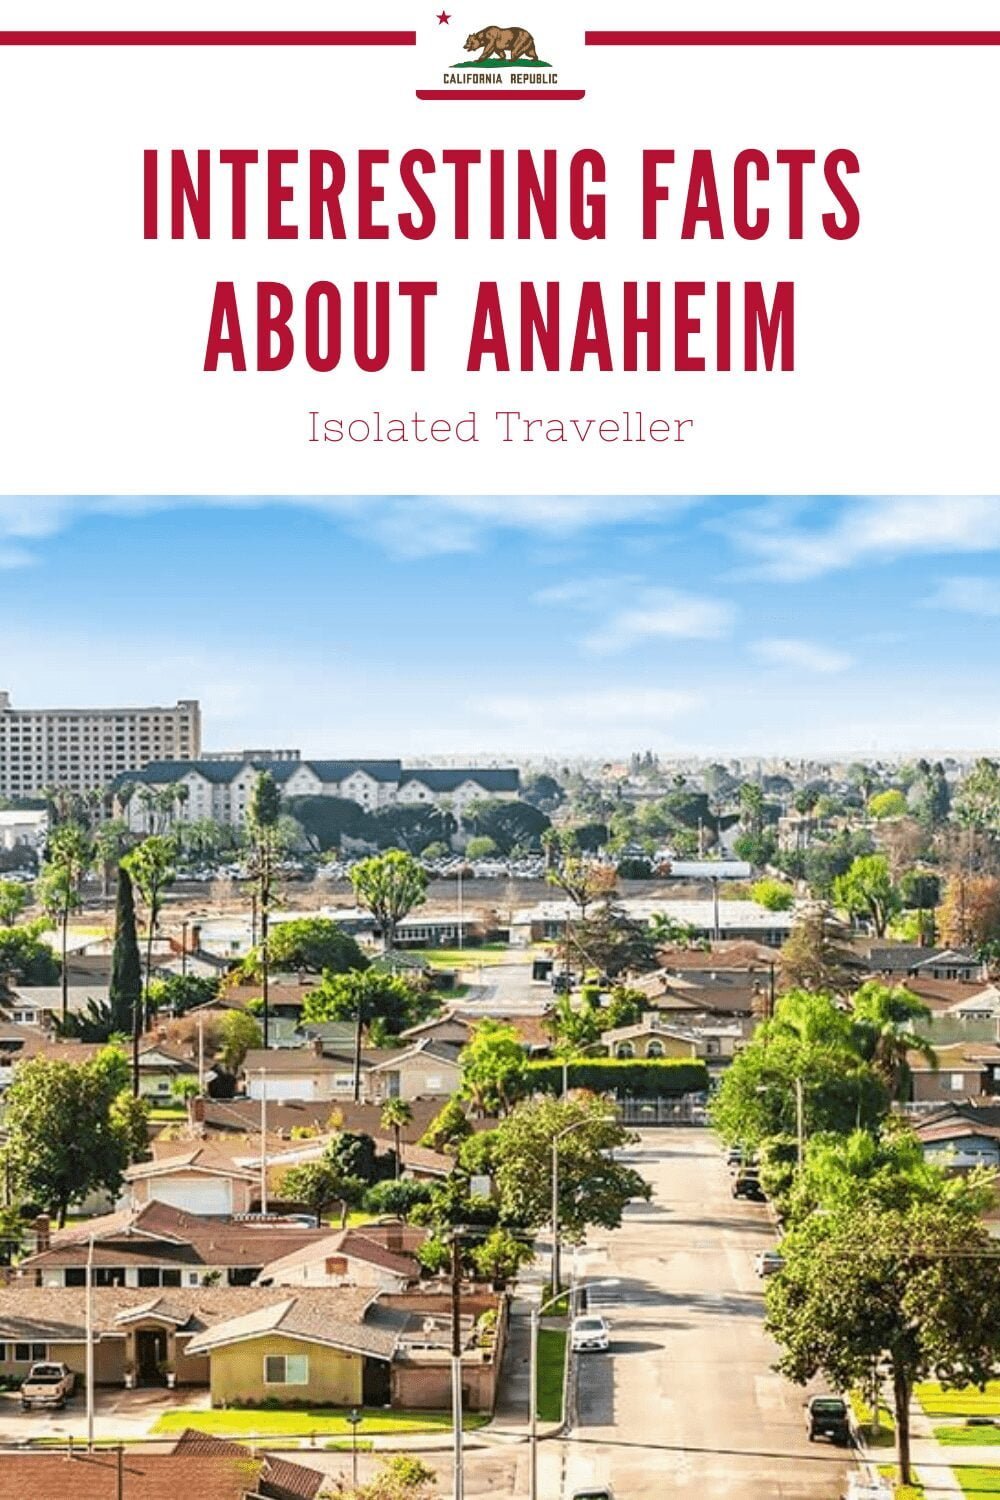 Facts About Anaheim